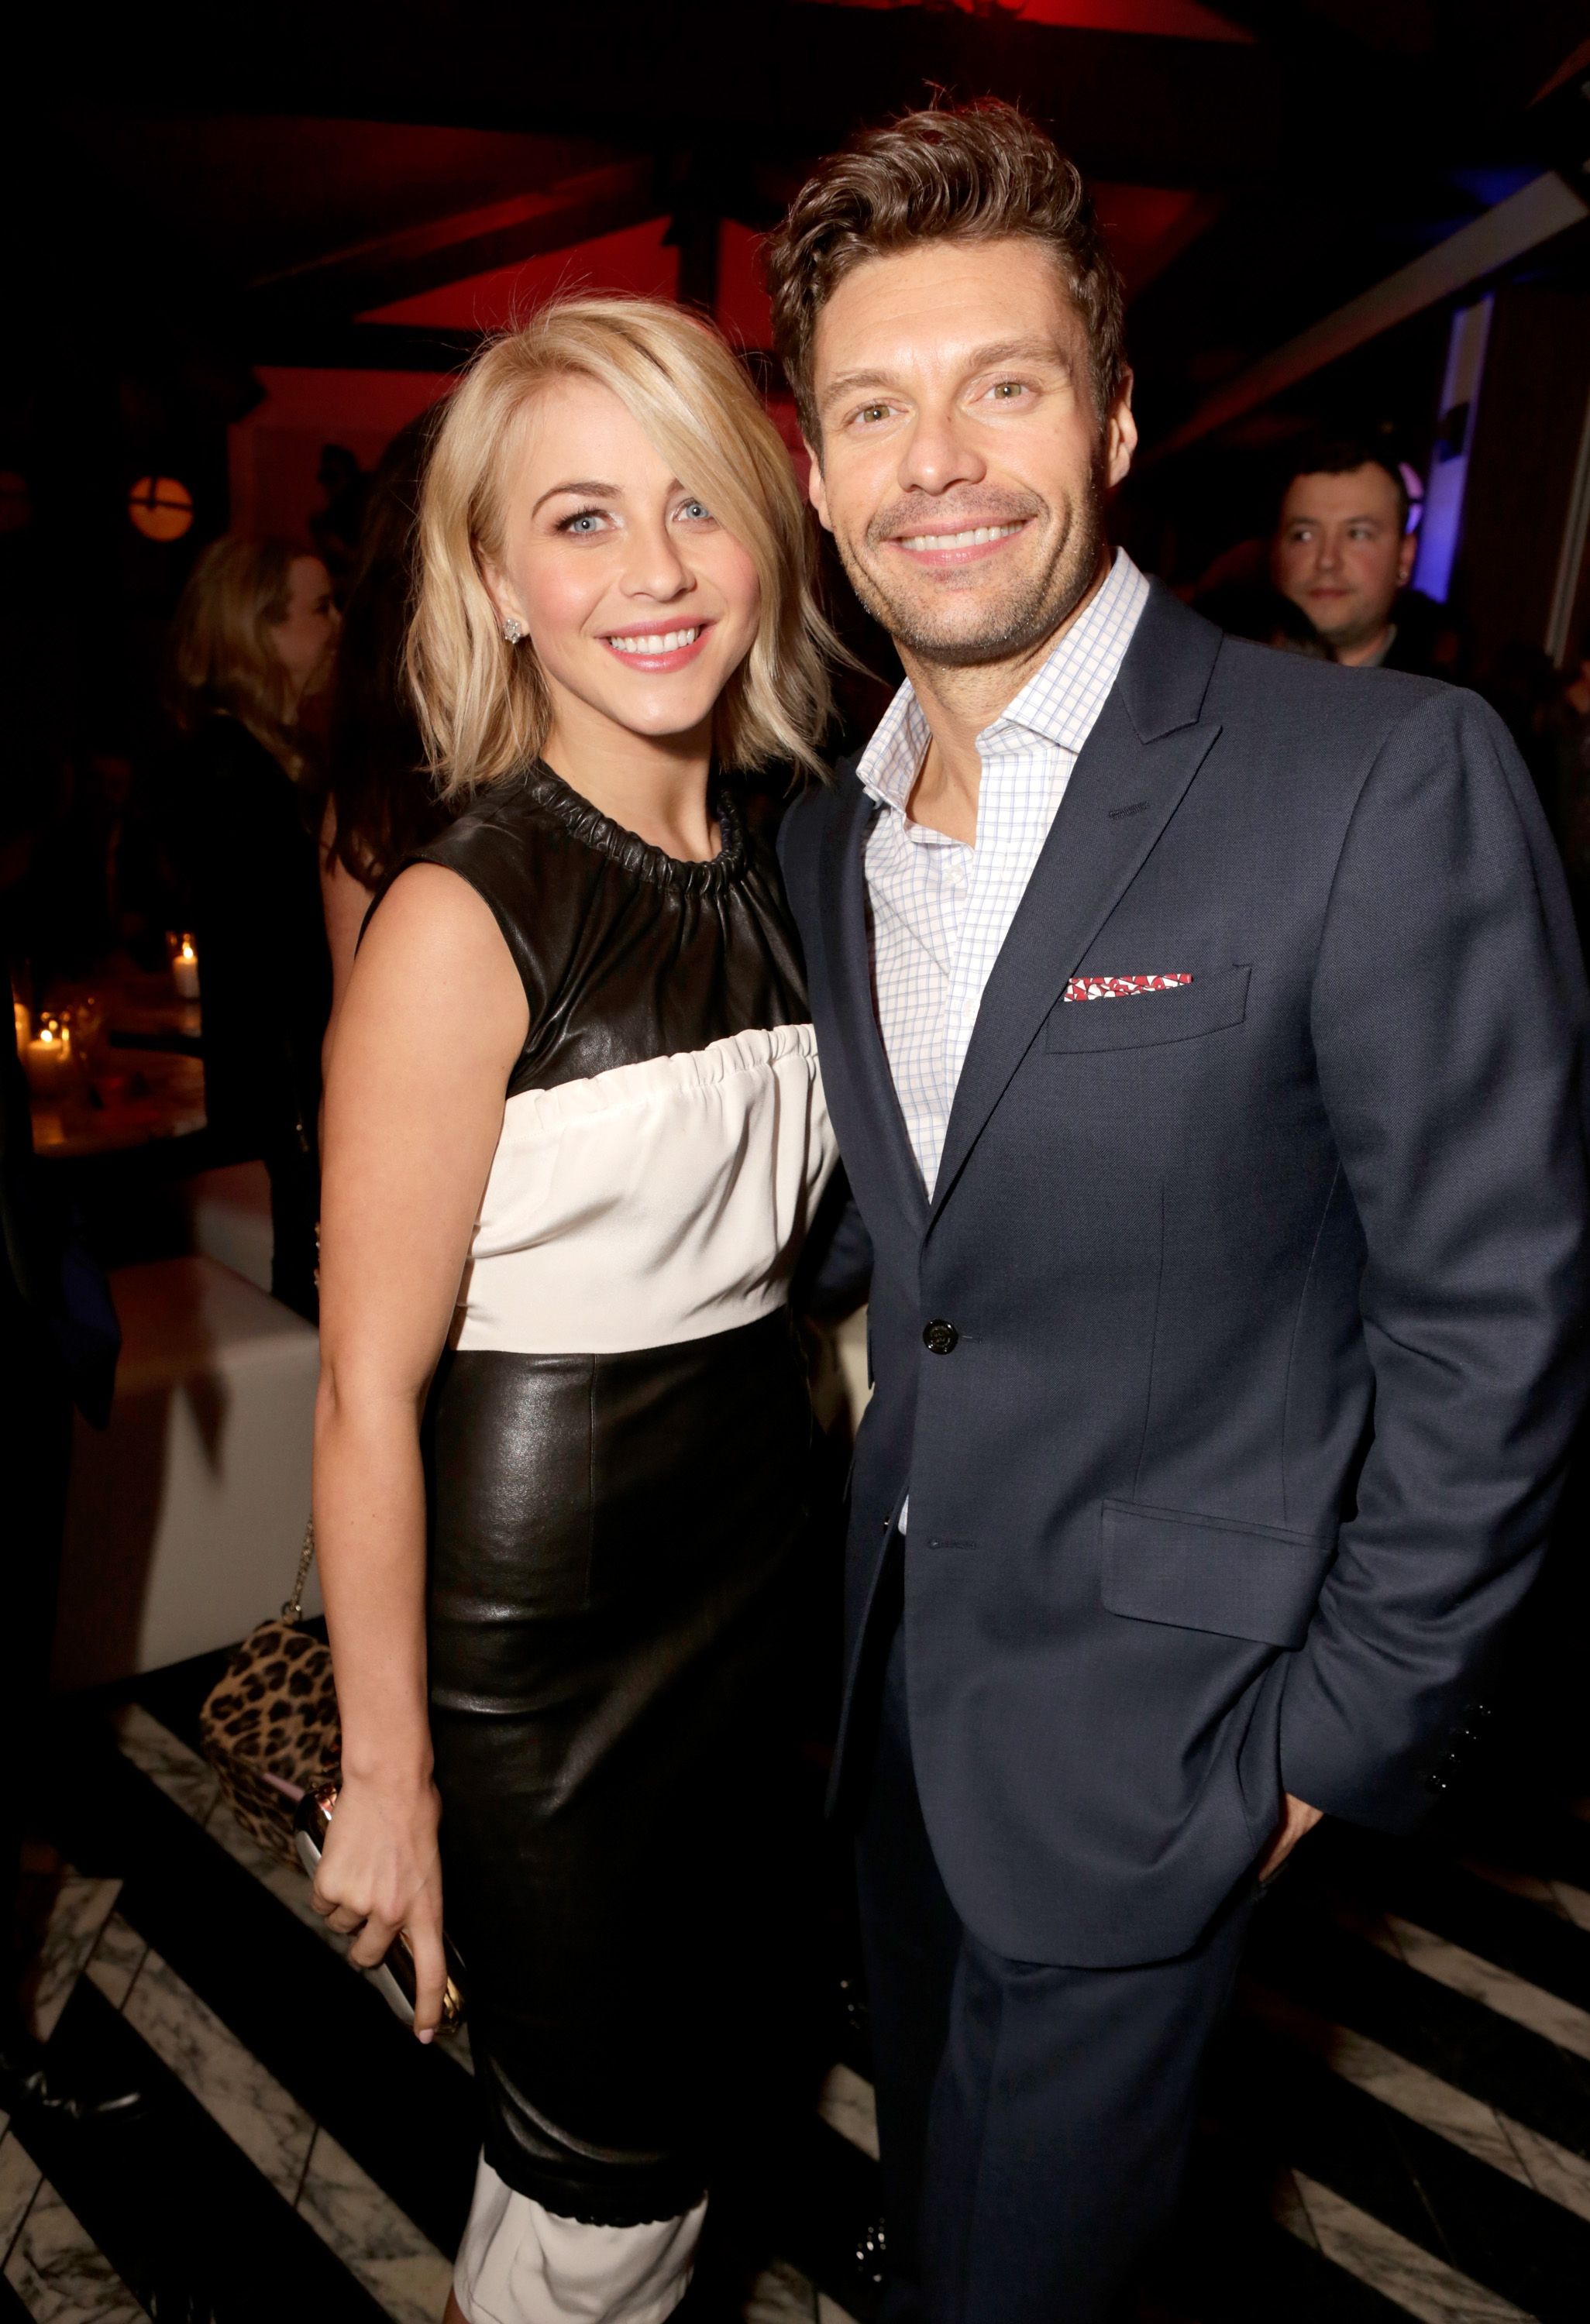 TV personalities Julianne Hough and Ryan Seacrest at the Topshop Topman LA Opening Party at Cecconi's West Hollywood on February 13, 2013 | Photo: Getty Images